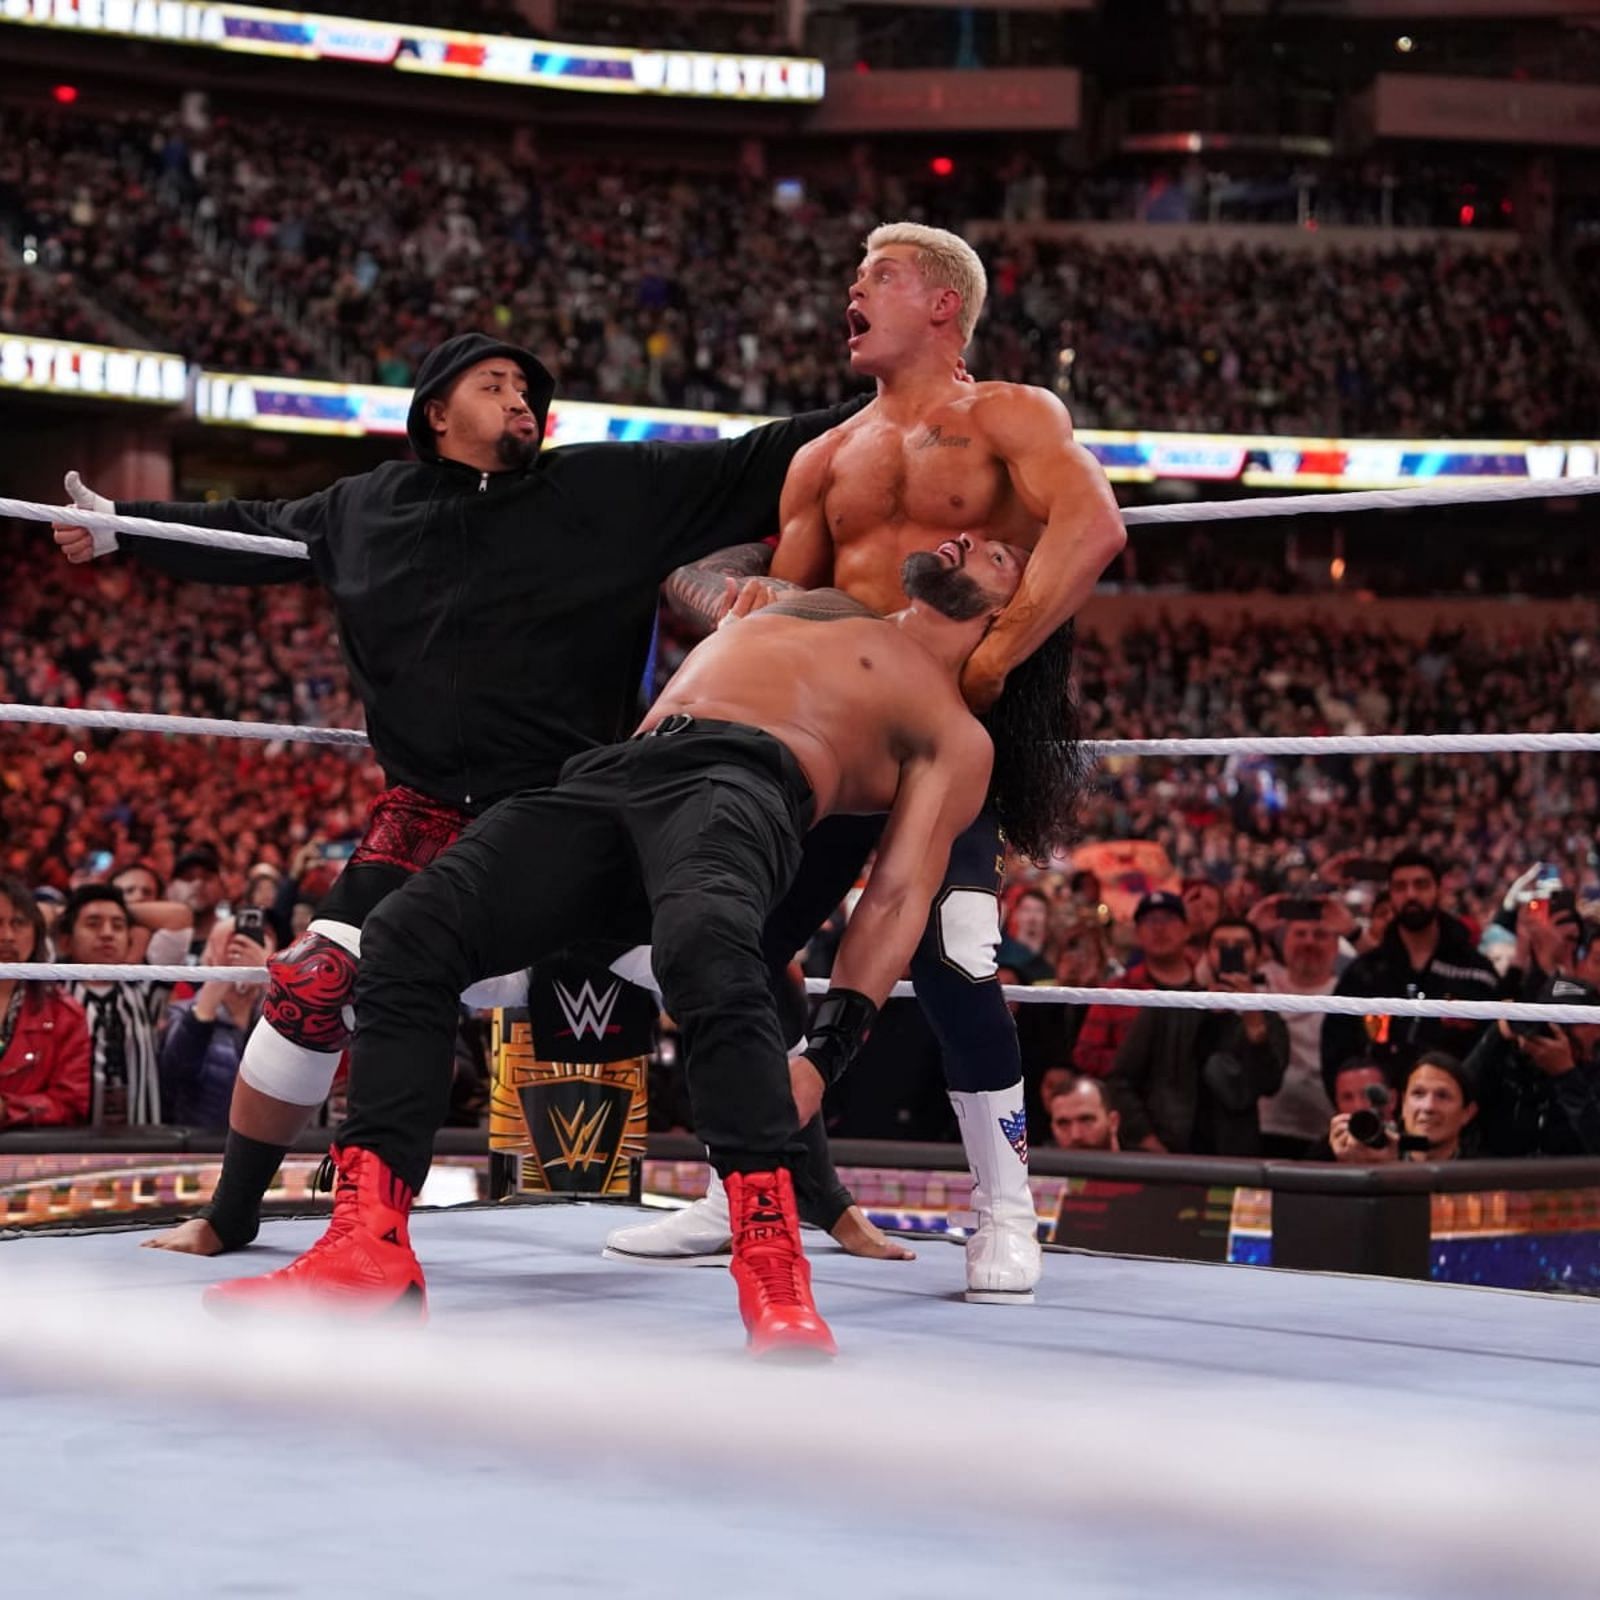 Solo Sikoa helped Roman Reigns defeat Cody Rhodes at WrestleMania 39.